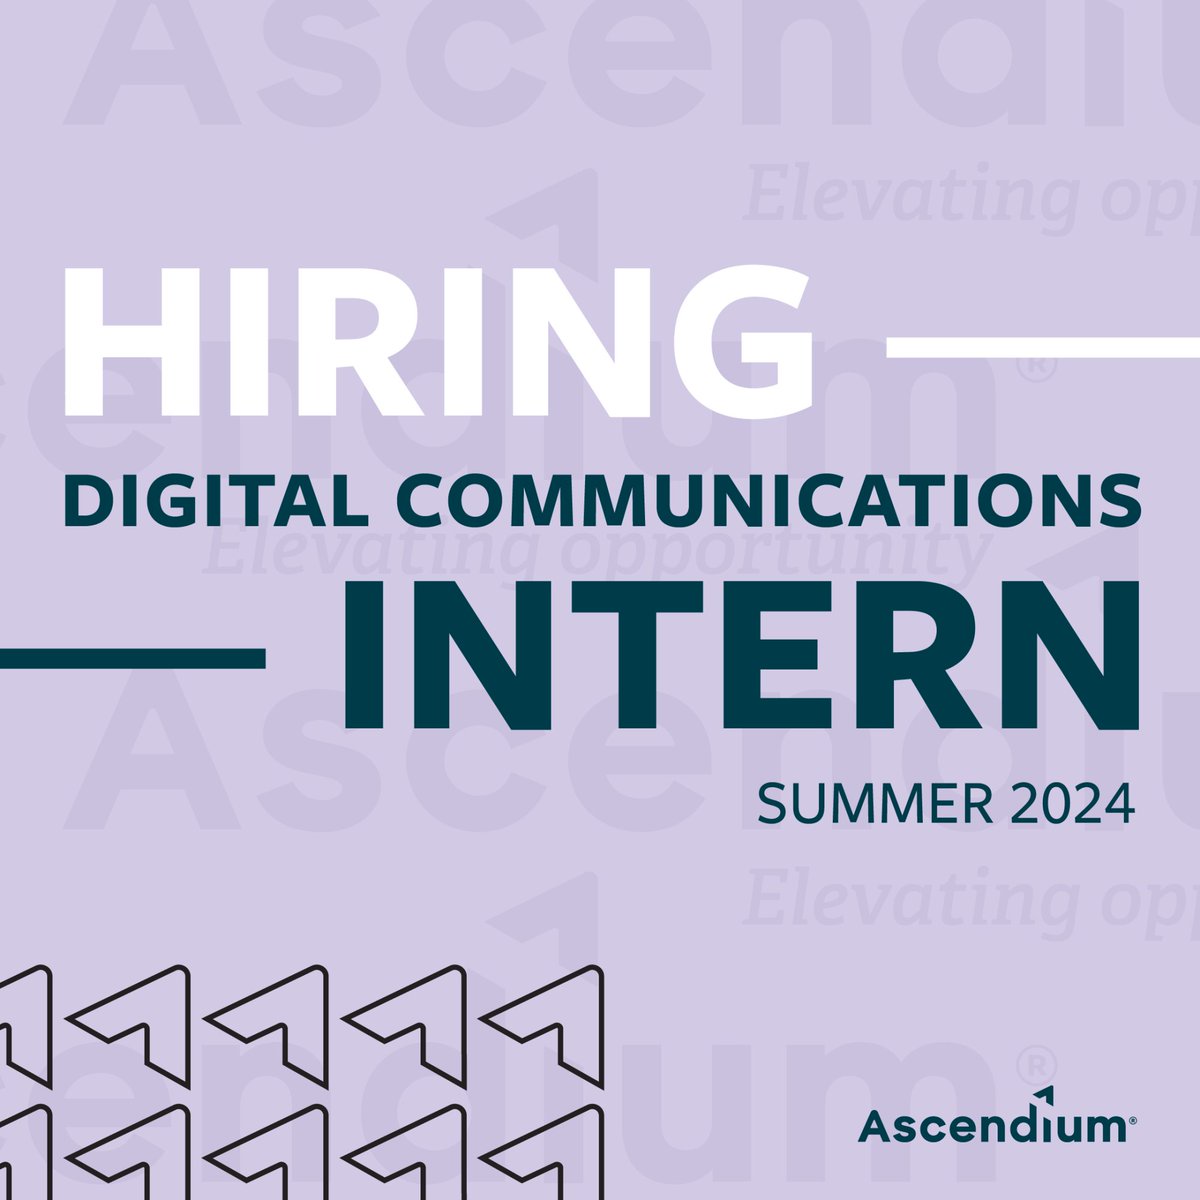 #AscendiumEd is #Hiring a #DigitalCommunications #Intern! In this paid #InternshipOpportunity, you’ll grow your #DigitalMarketing skills while supporting the evolution of our #SocialMedia communications. Apply today! 🤳
bit.ly/3W8dJbK

#JobsInMadison